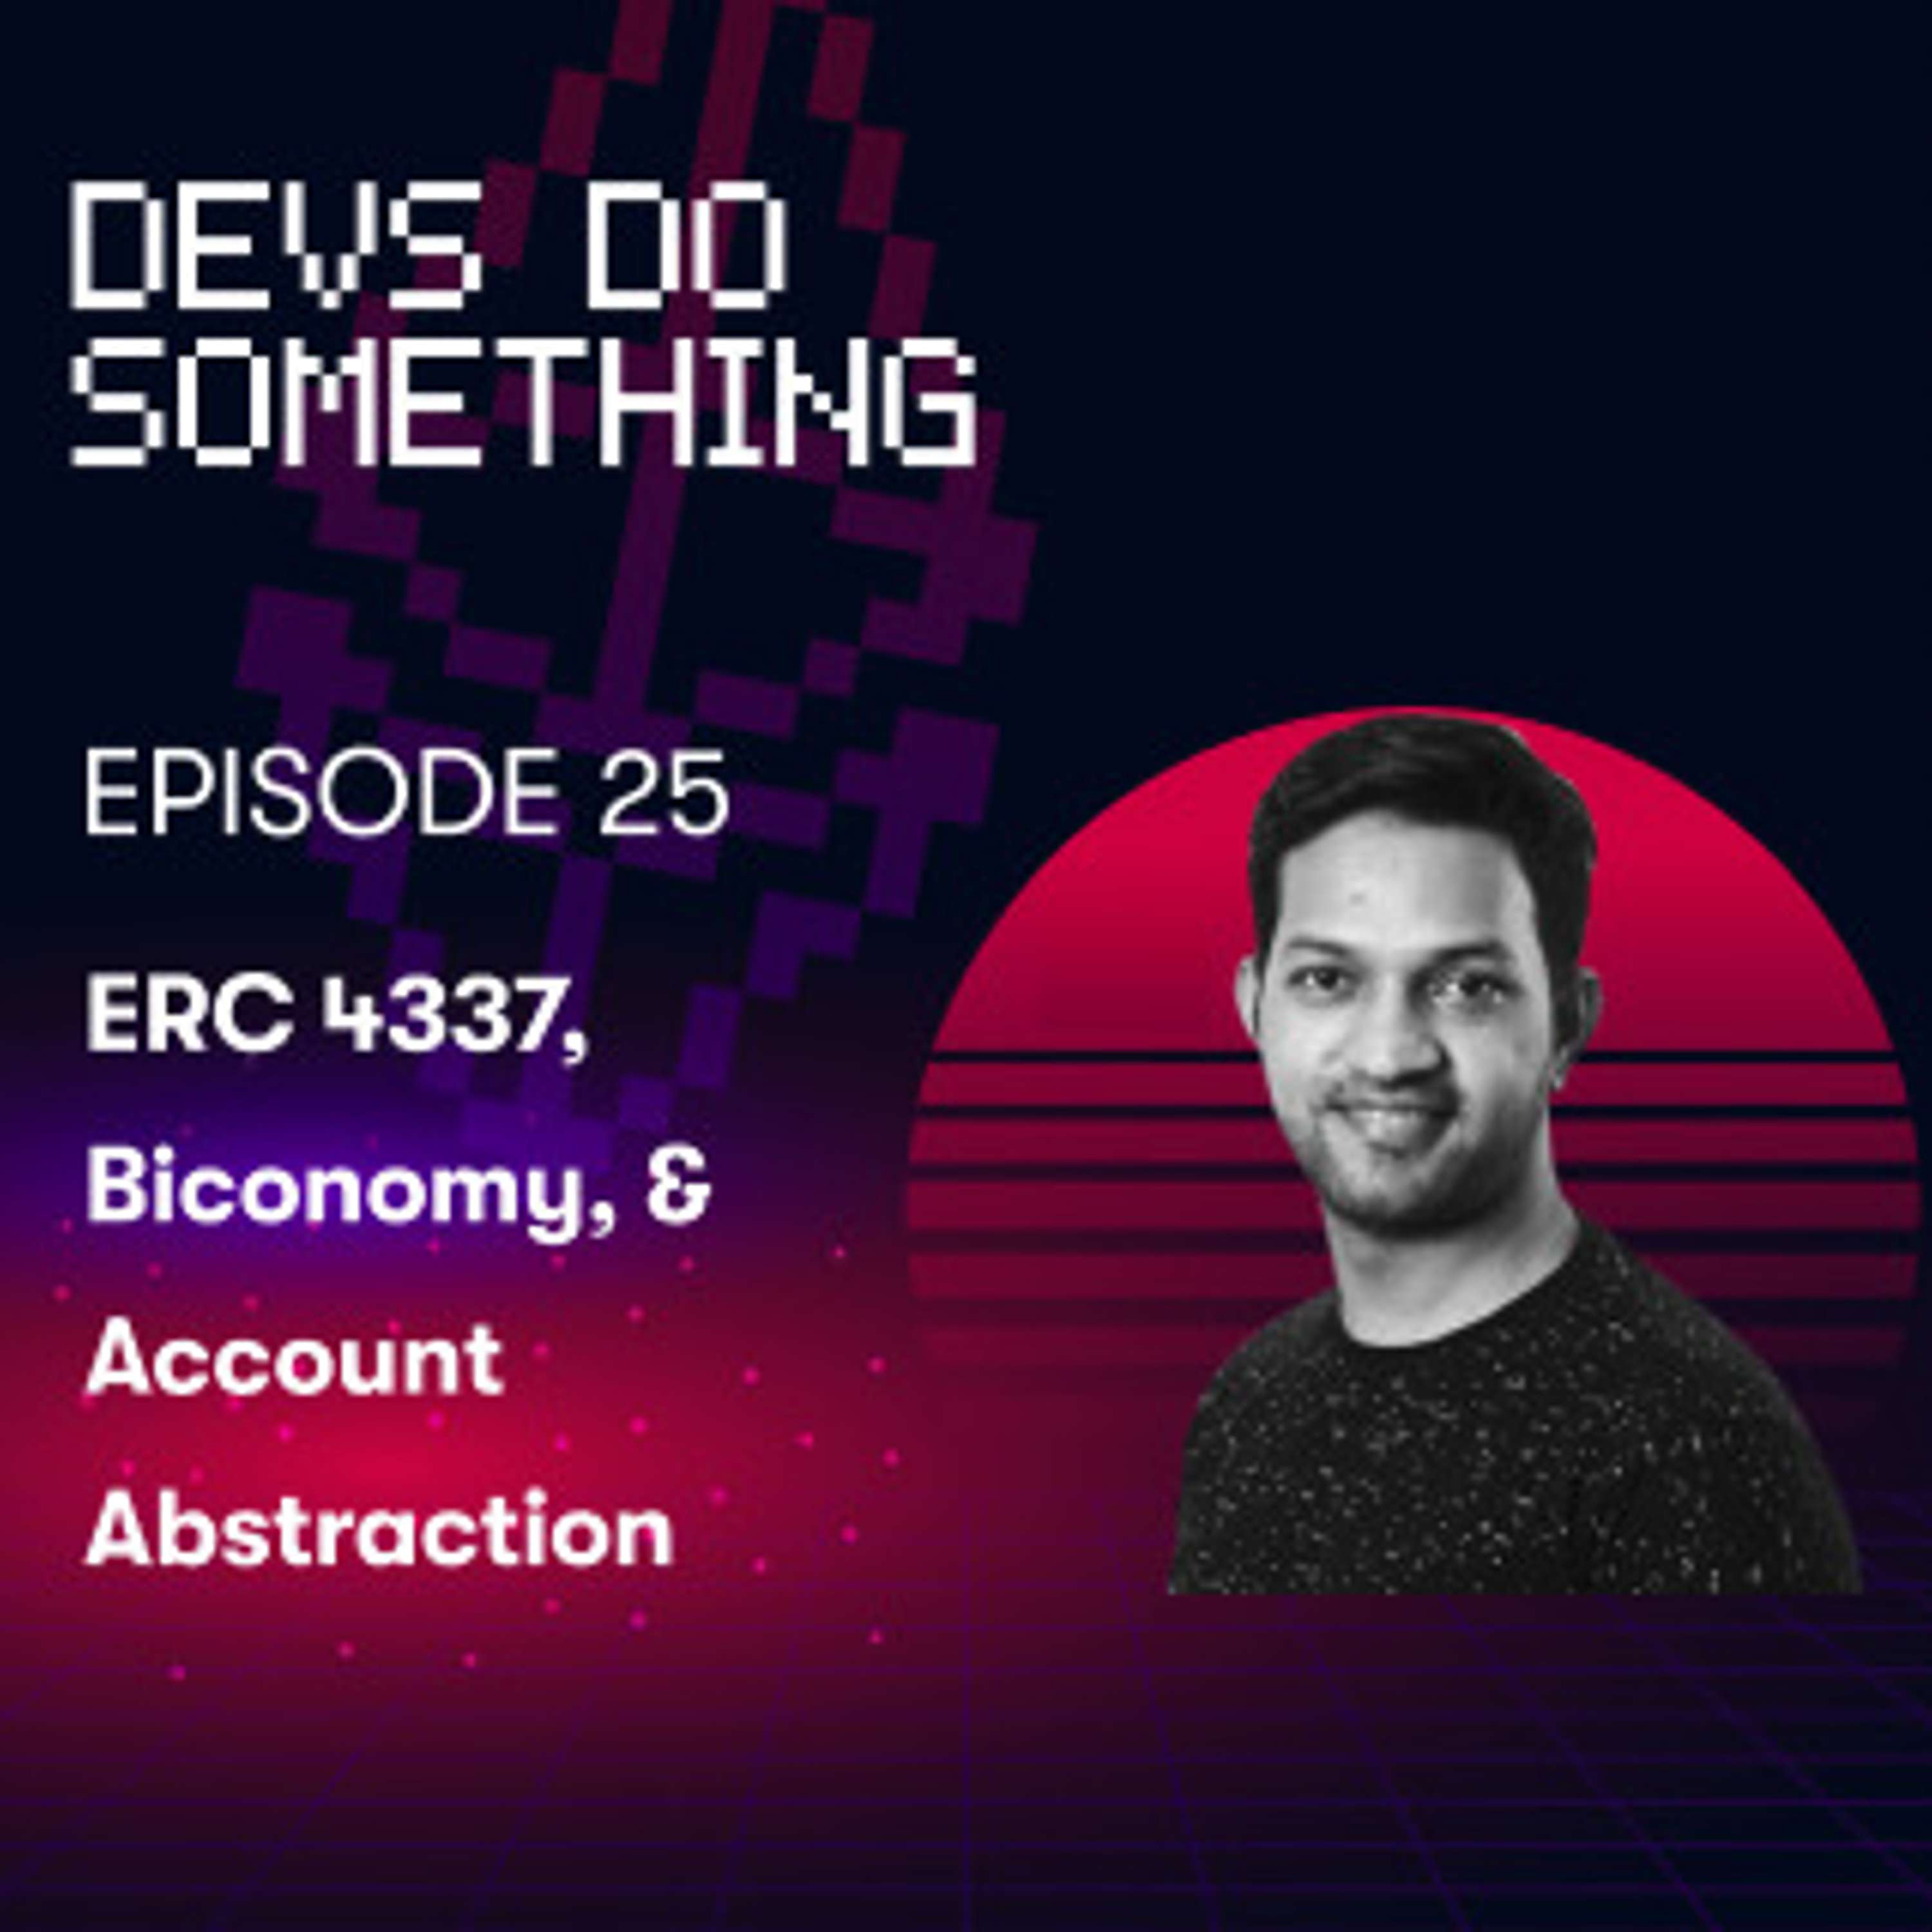 Account Abstraction, ERC 4337, & Biconomy with sachint.eth